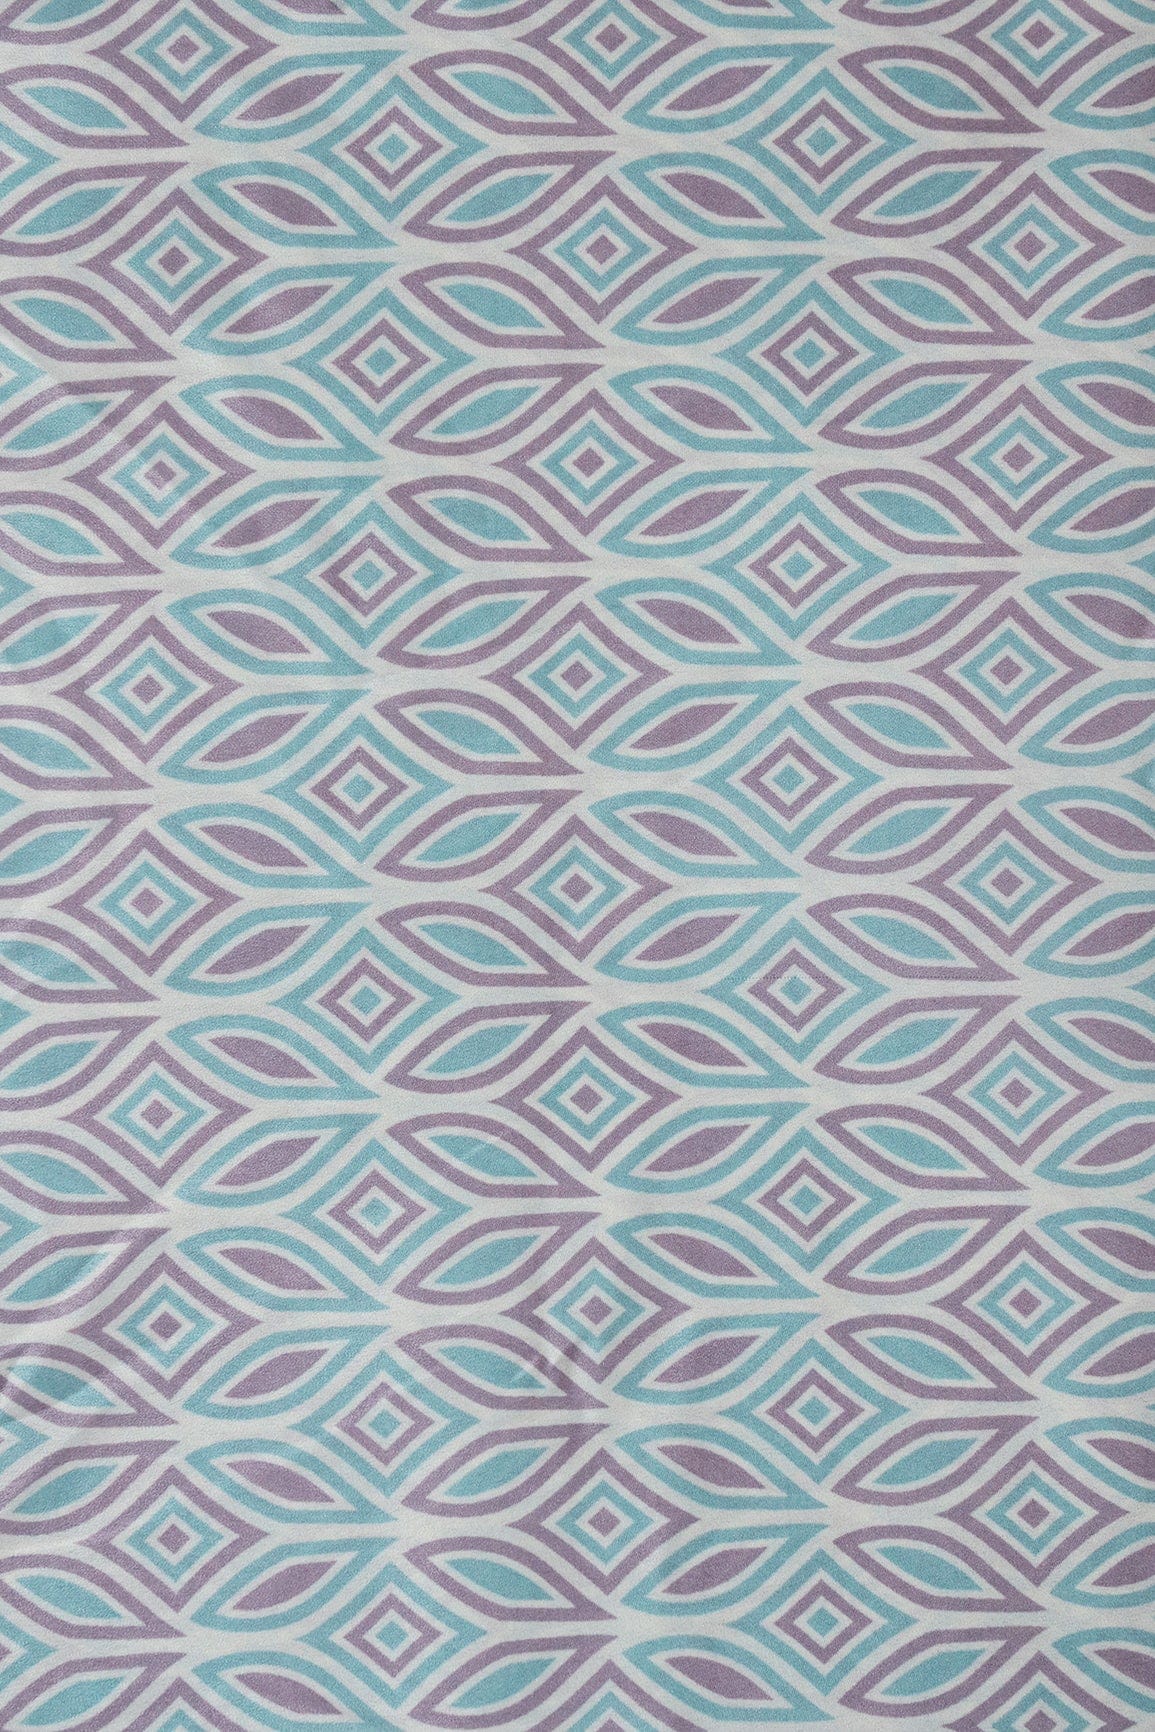 Pastel Teal And Lavender Geometric Pattern Digital Print On French Crepe Fabric - doeraa